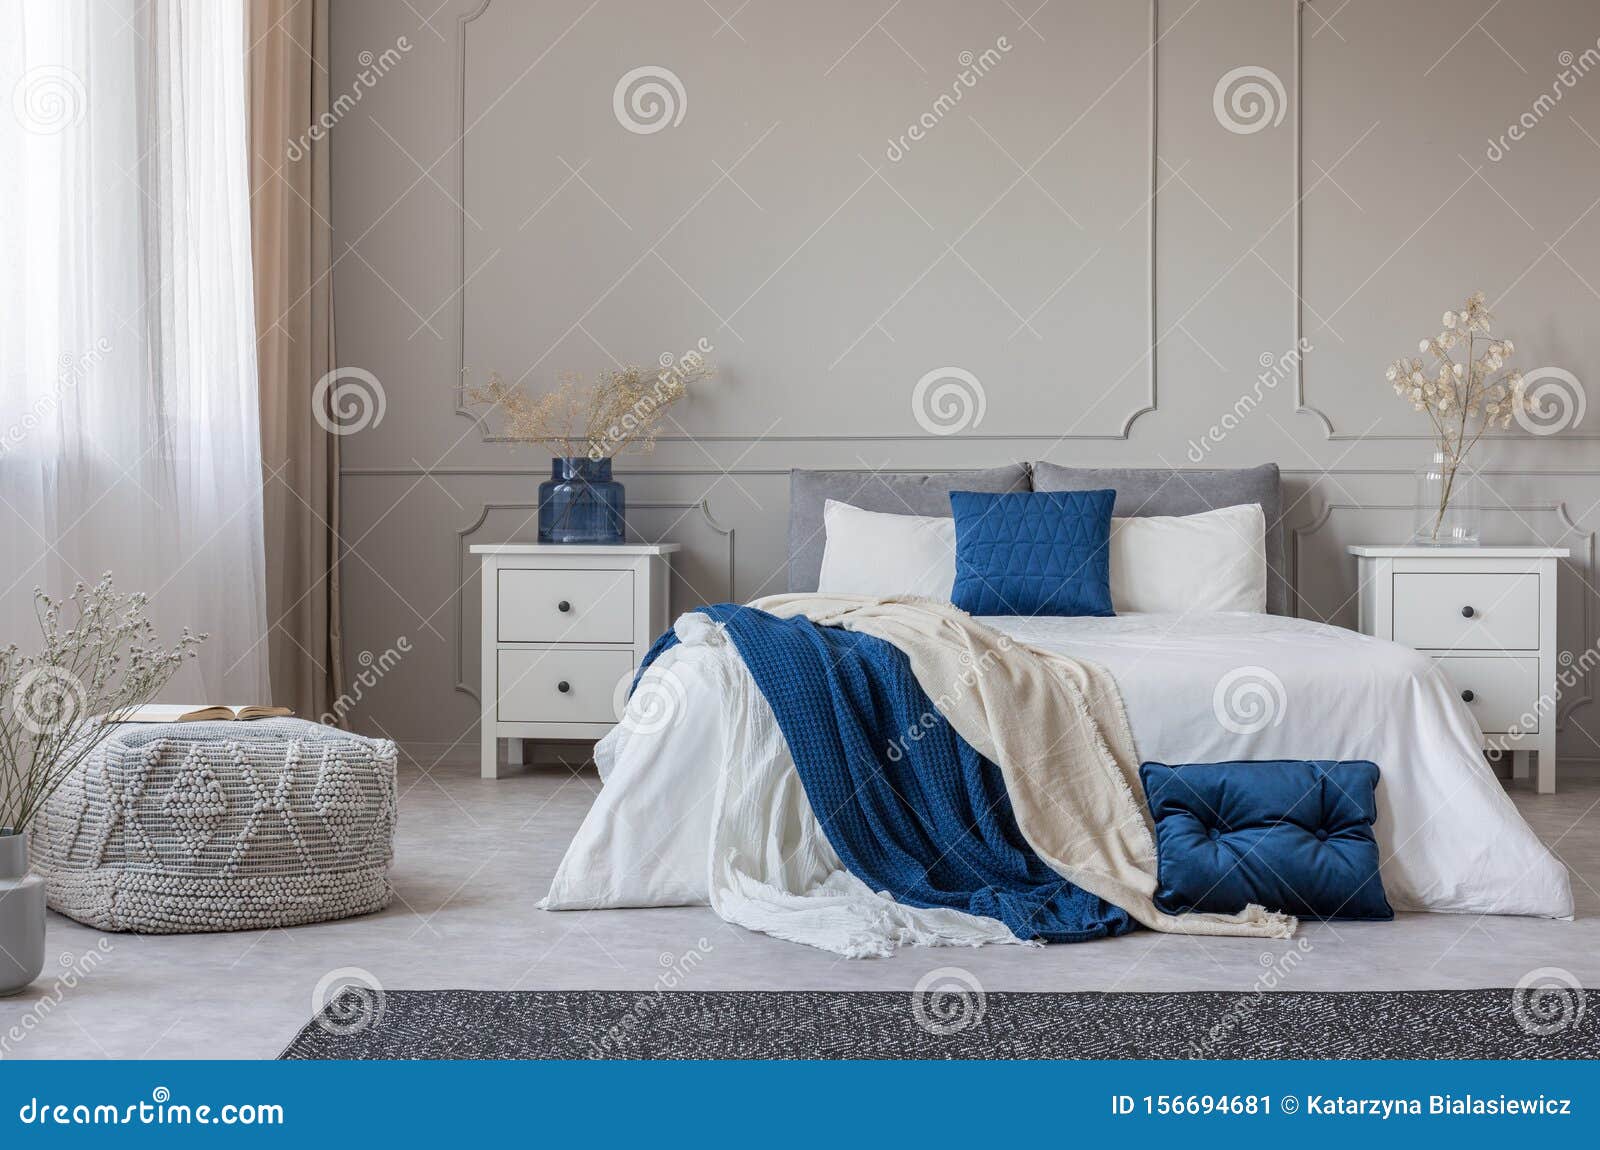 blue pillow and blanket on white bed in spacious bedroom interior, copy space on empty grey wall